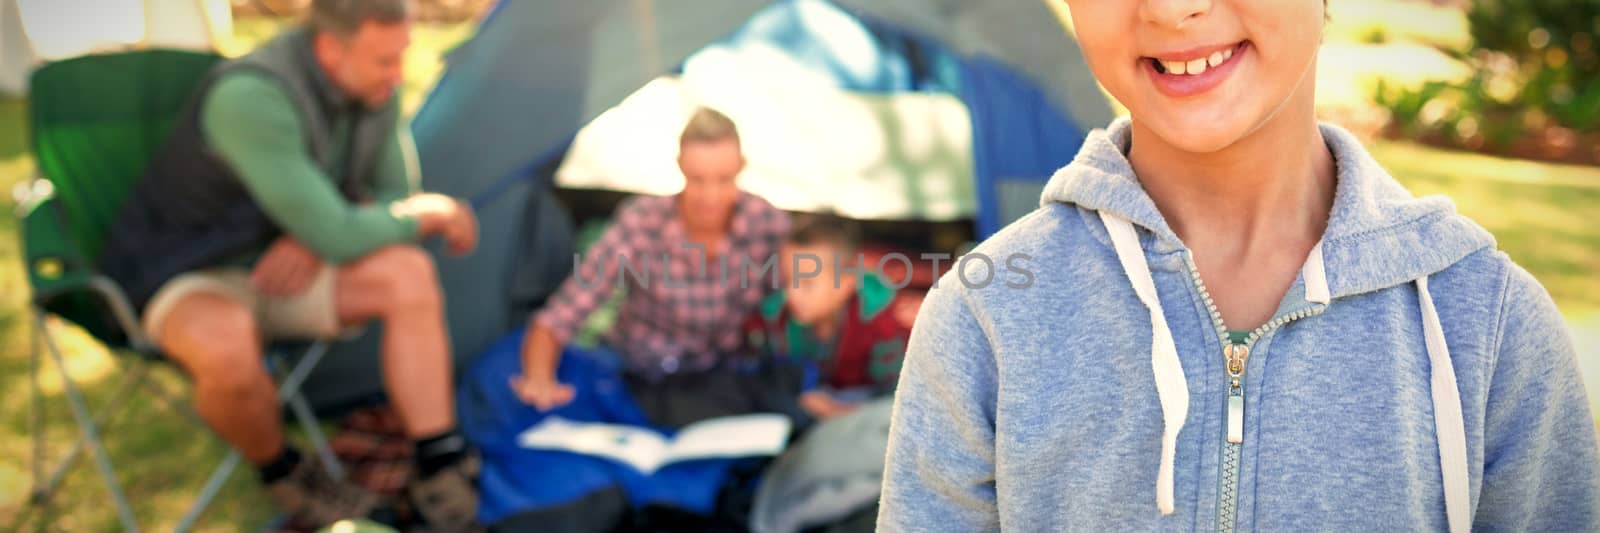 Girl smiling at camera while family sitting at tent in background on a sunny day